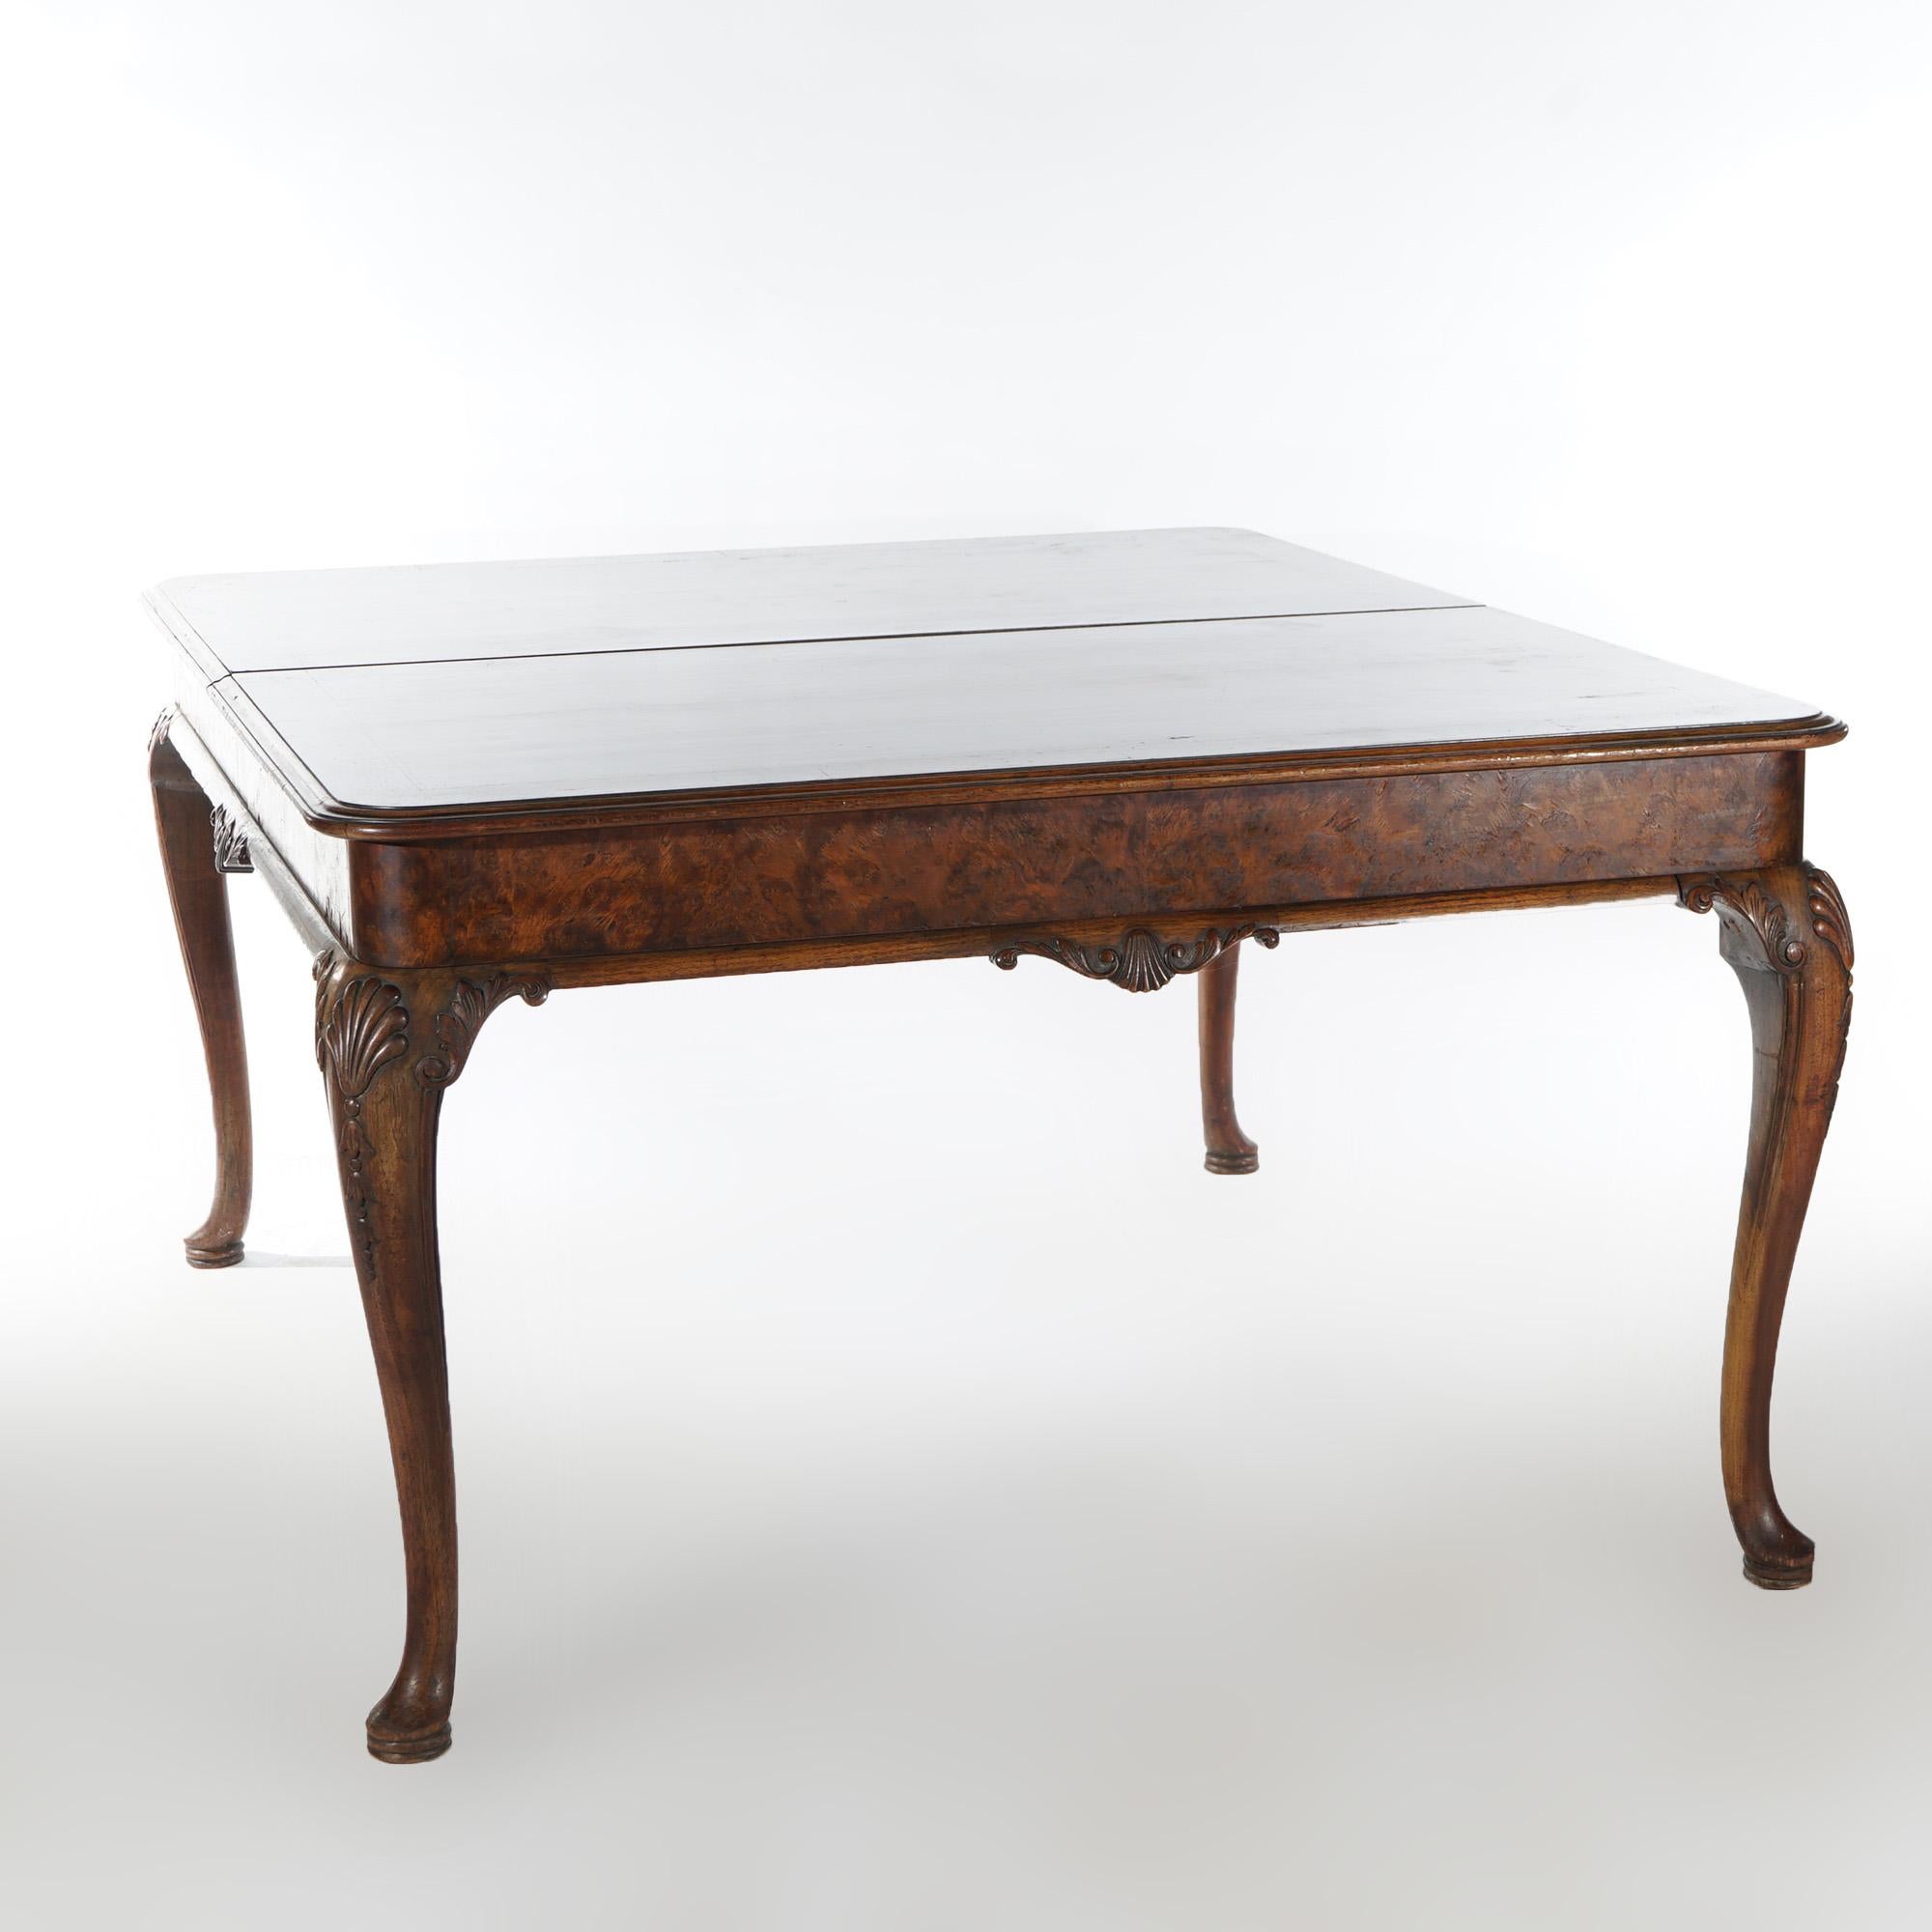 Antique Queen Anne Style Mahogany Banded Inlaid Dining Table & Two Leaves 1930 For Sale 8